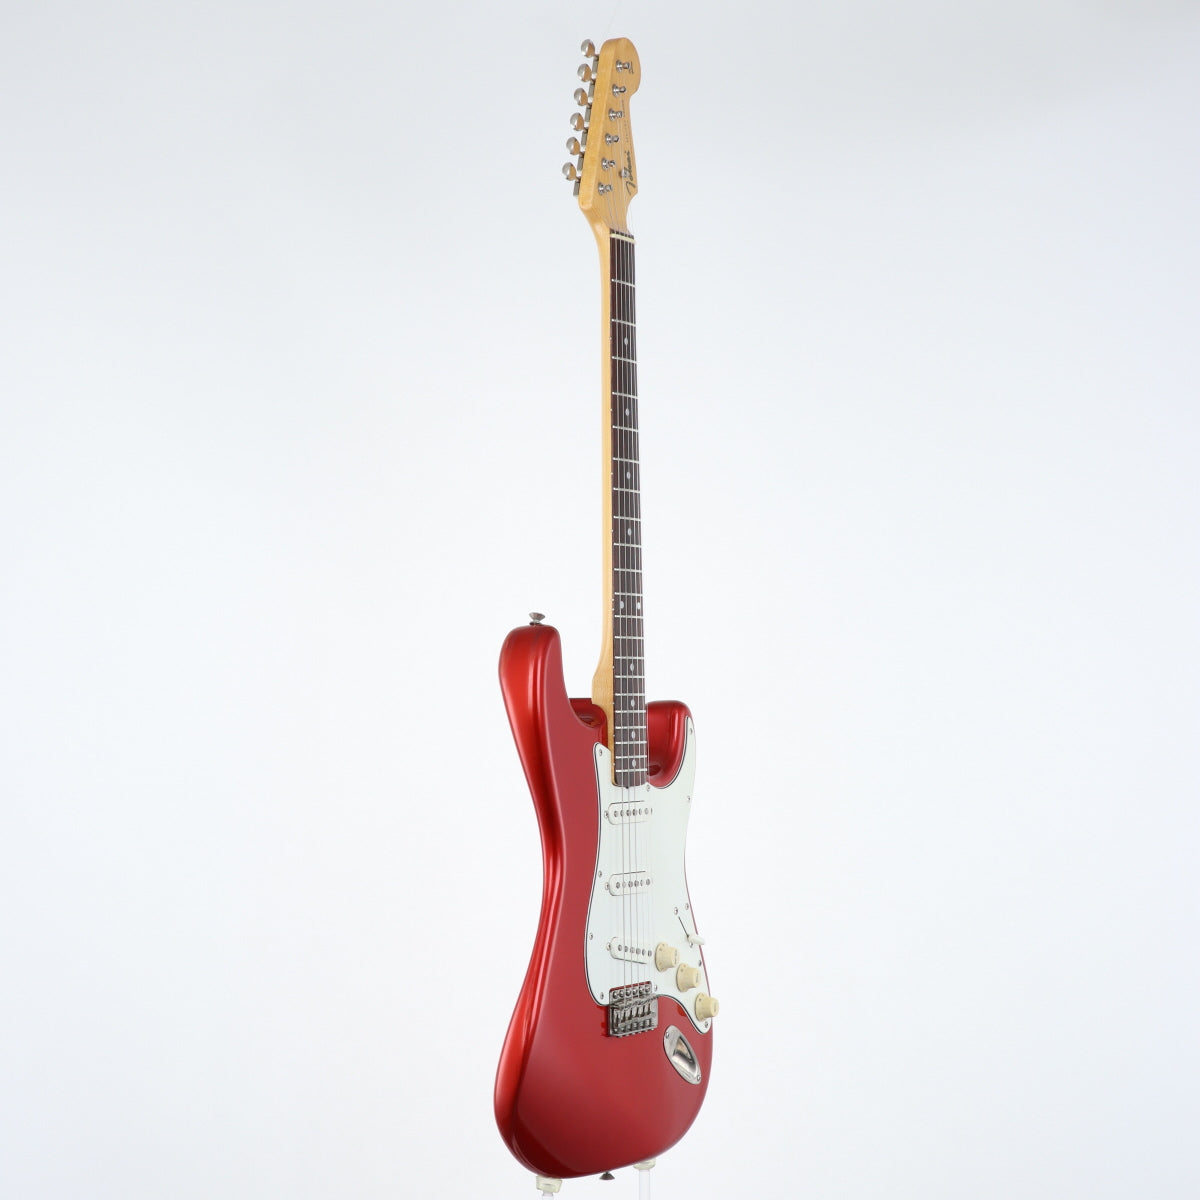 [SN 1013728] USED Tokai / ST-80 Candy Apple Red [11]